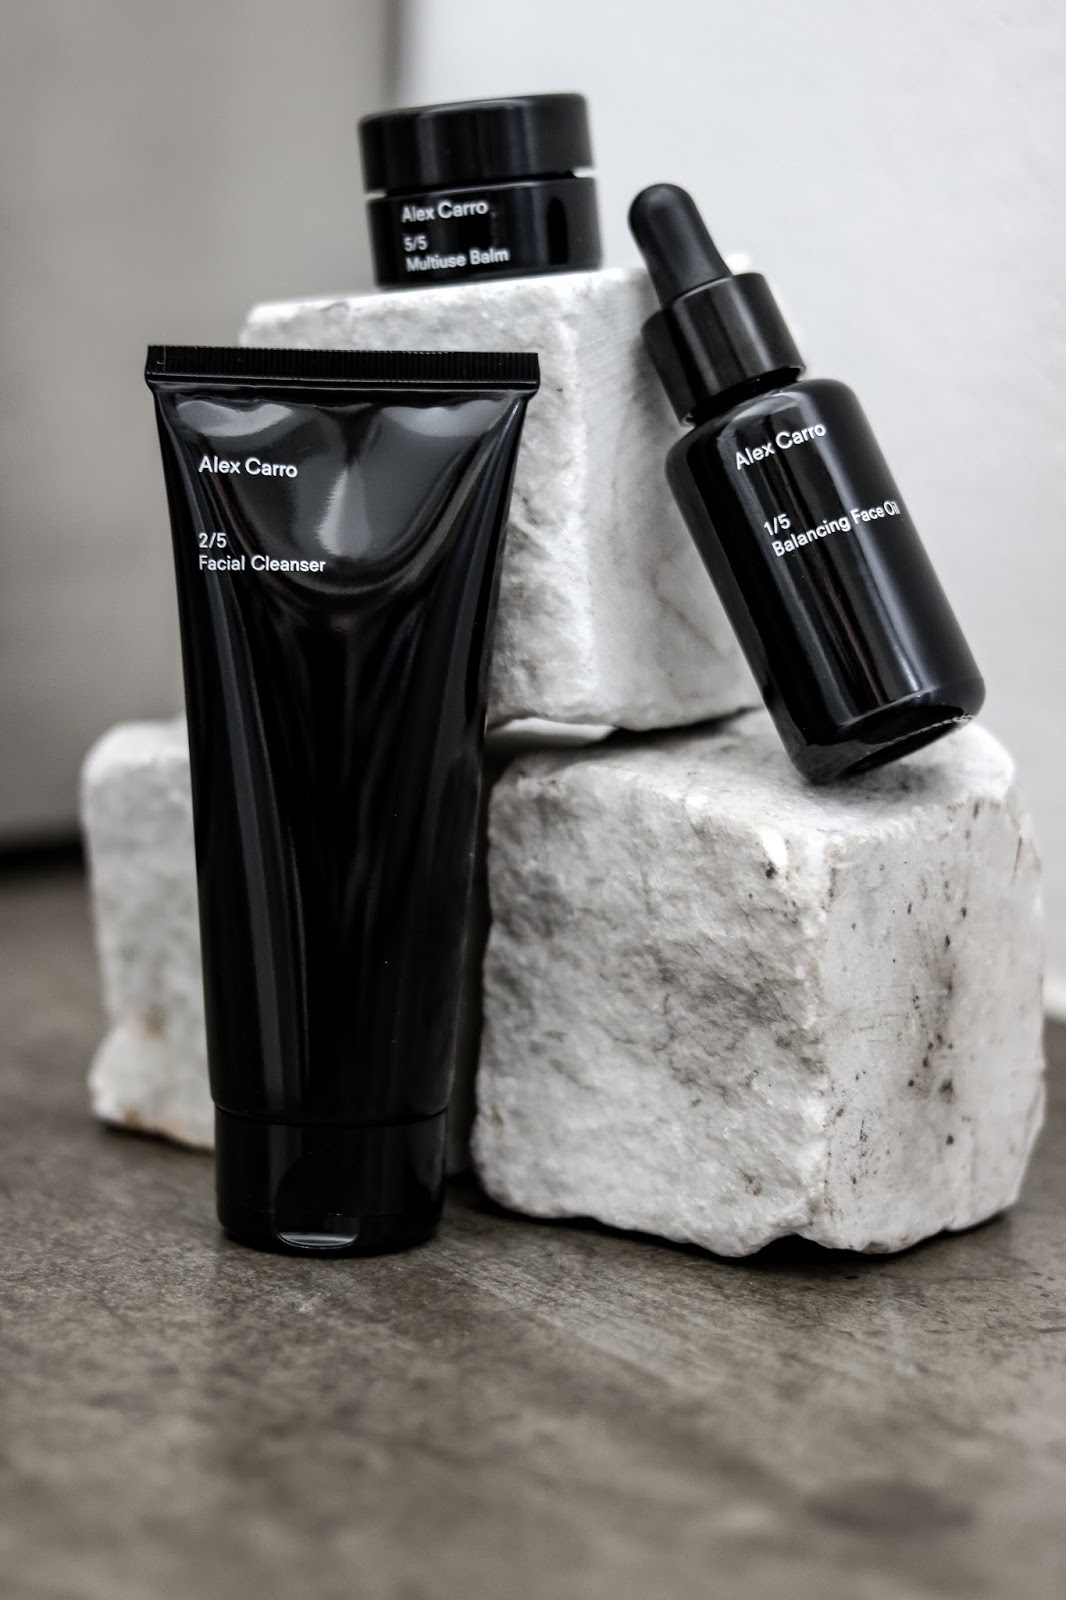 Alex Carro Minimal Skincare Review by Almost Chic Blog